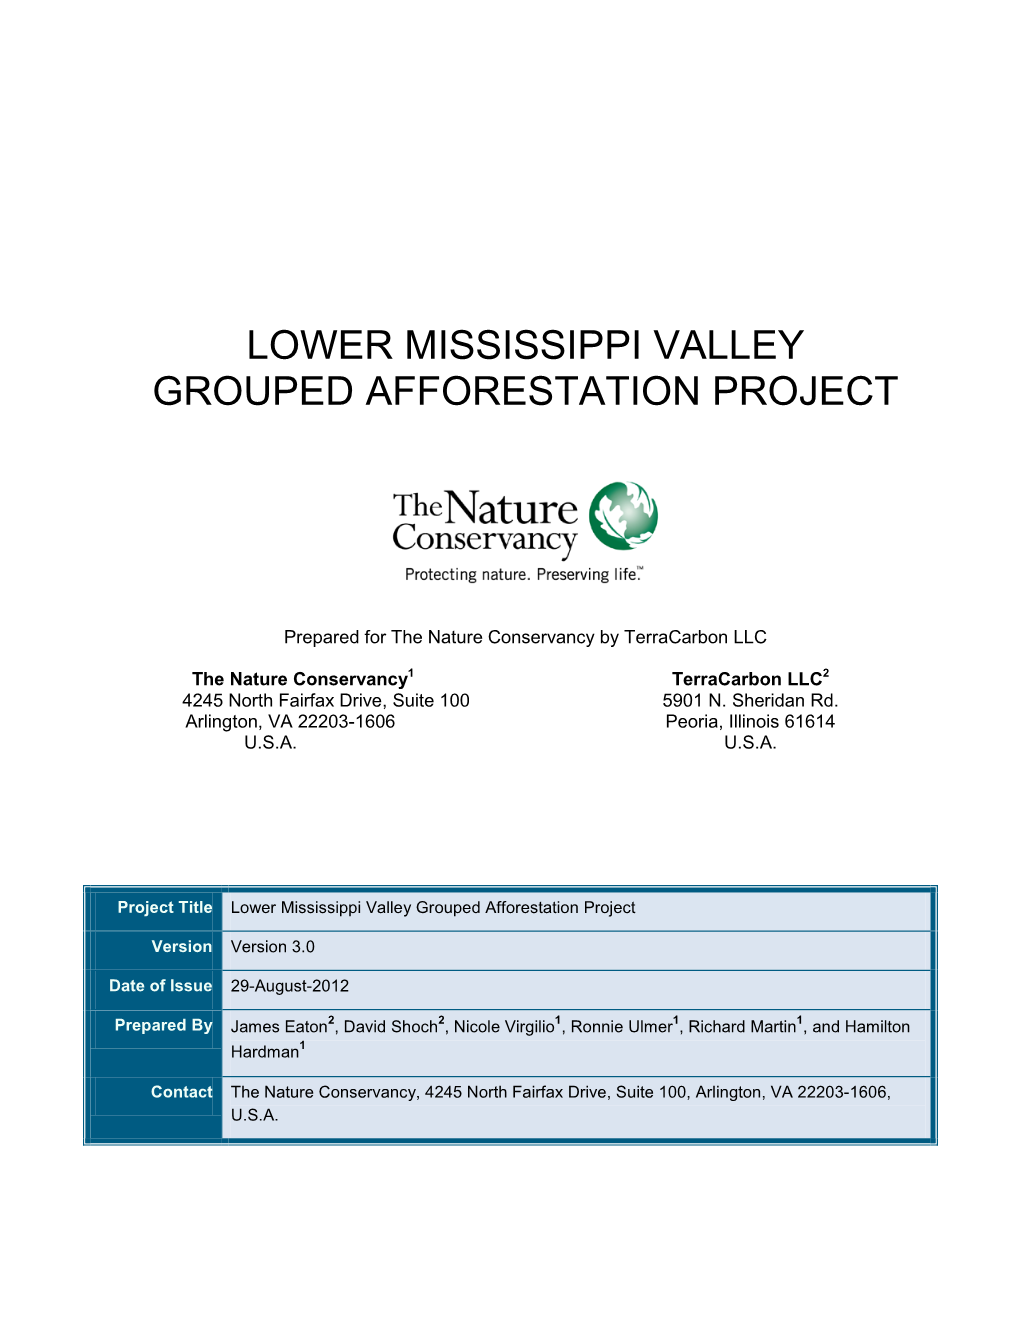 Lower Mississippi Valley Grouped Afforestation Project